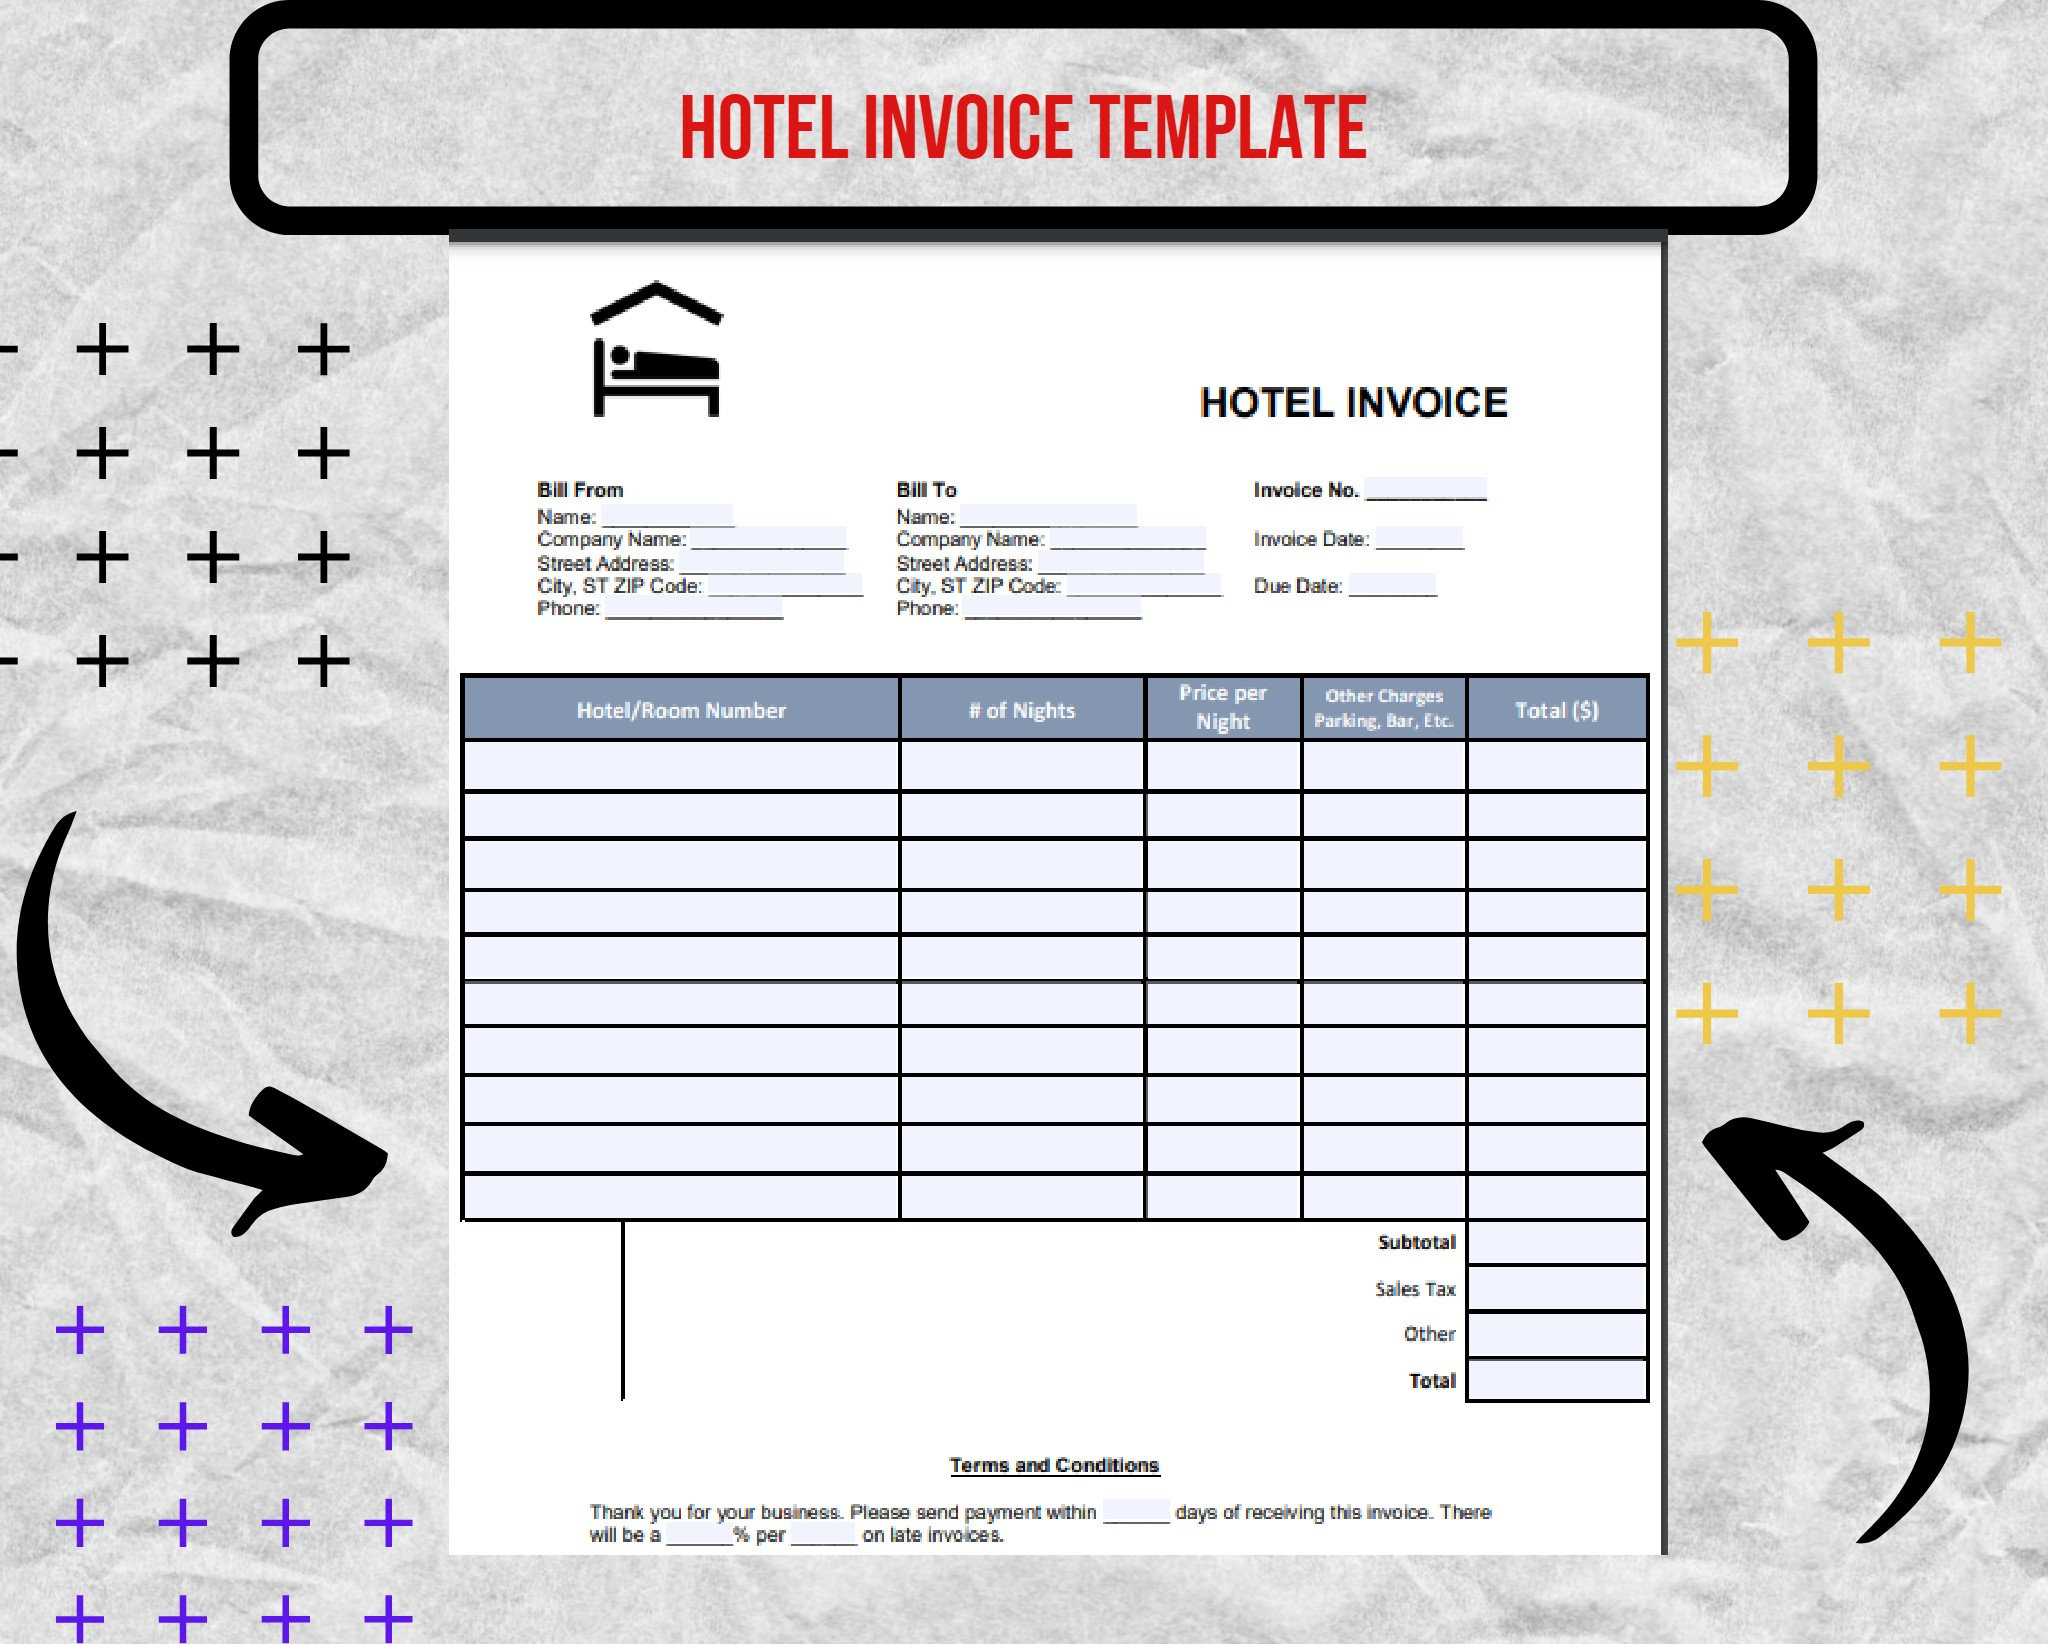 Hotel Receipt Hotel Receipt Forms Hotel Receipt Template Etsy